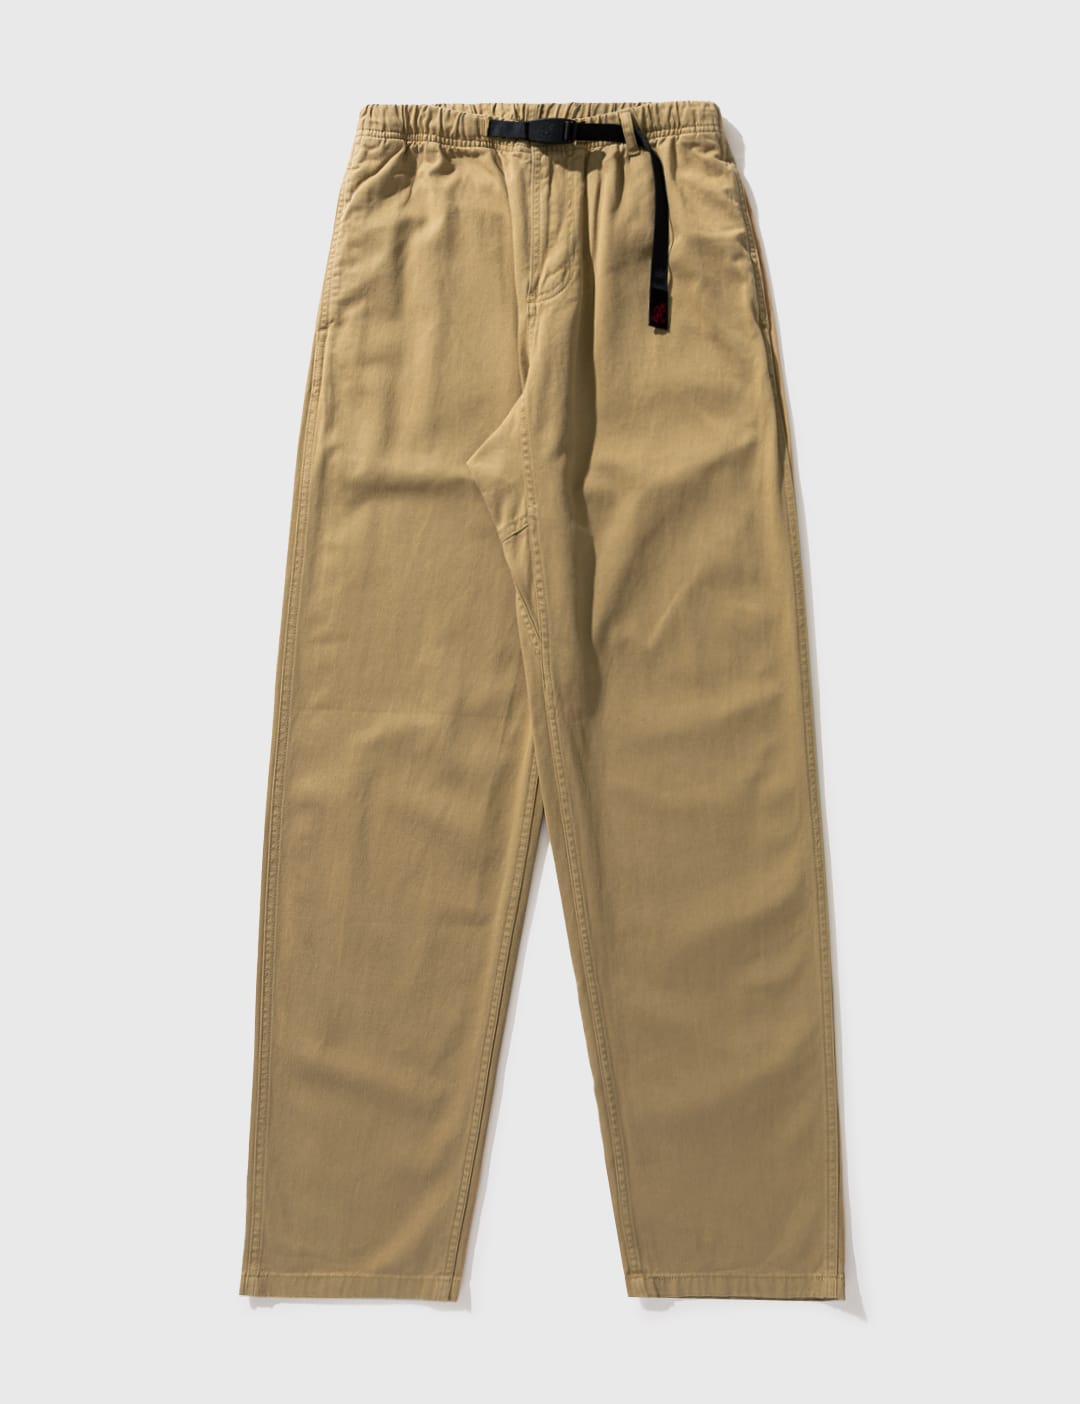 Gramicci - Gramicci Pants | HBX - Globally Curated Fashion and